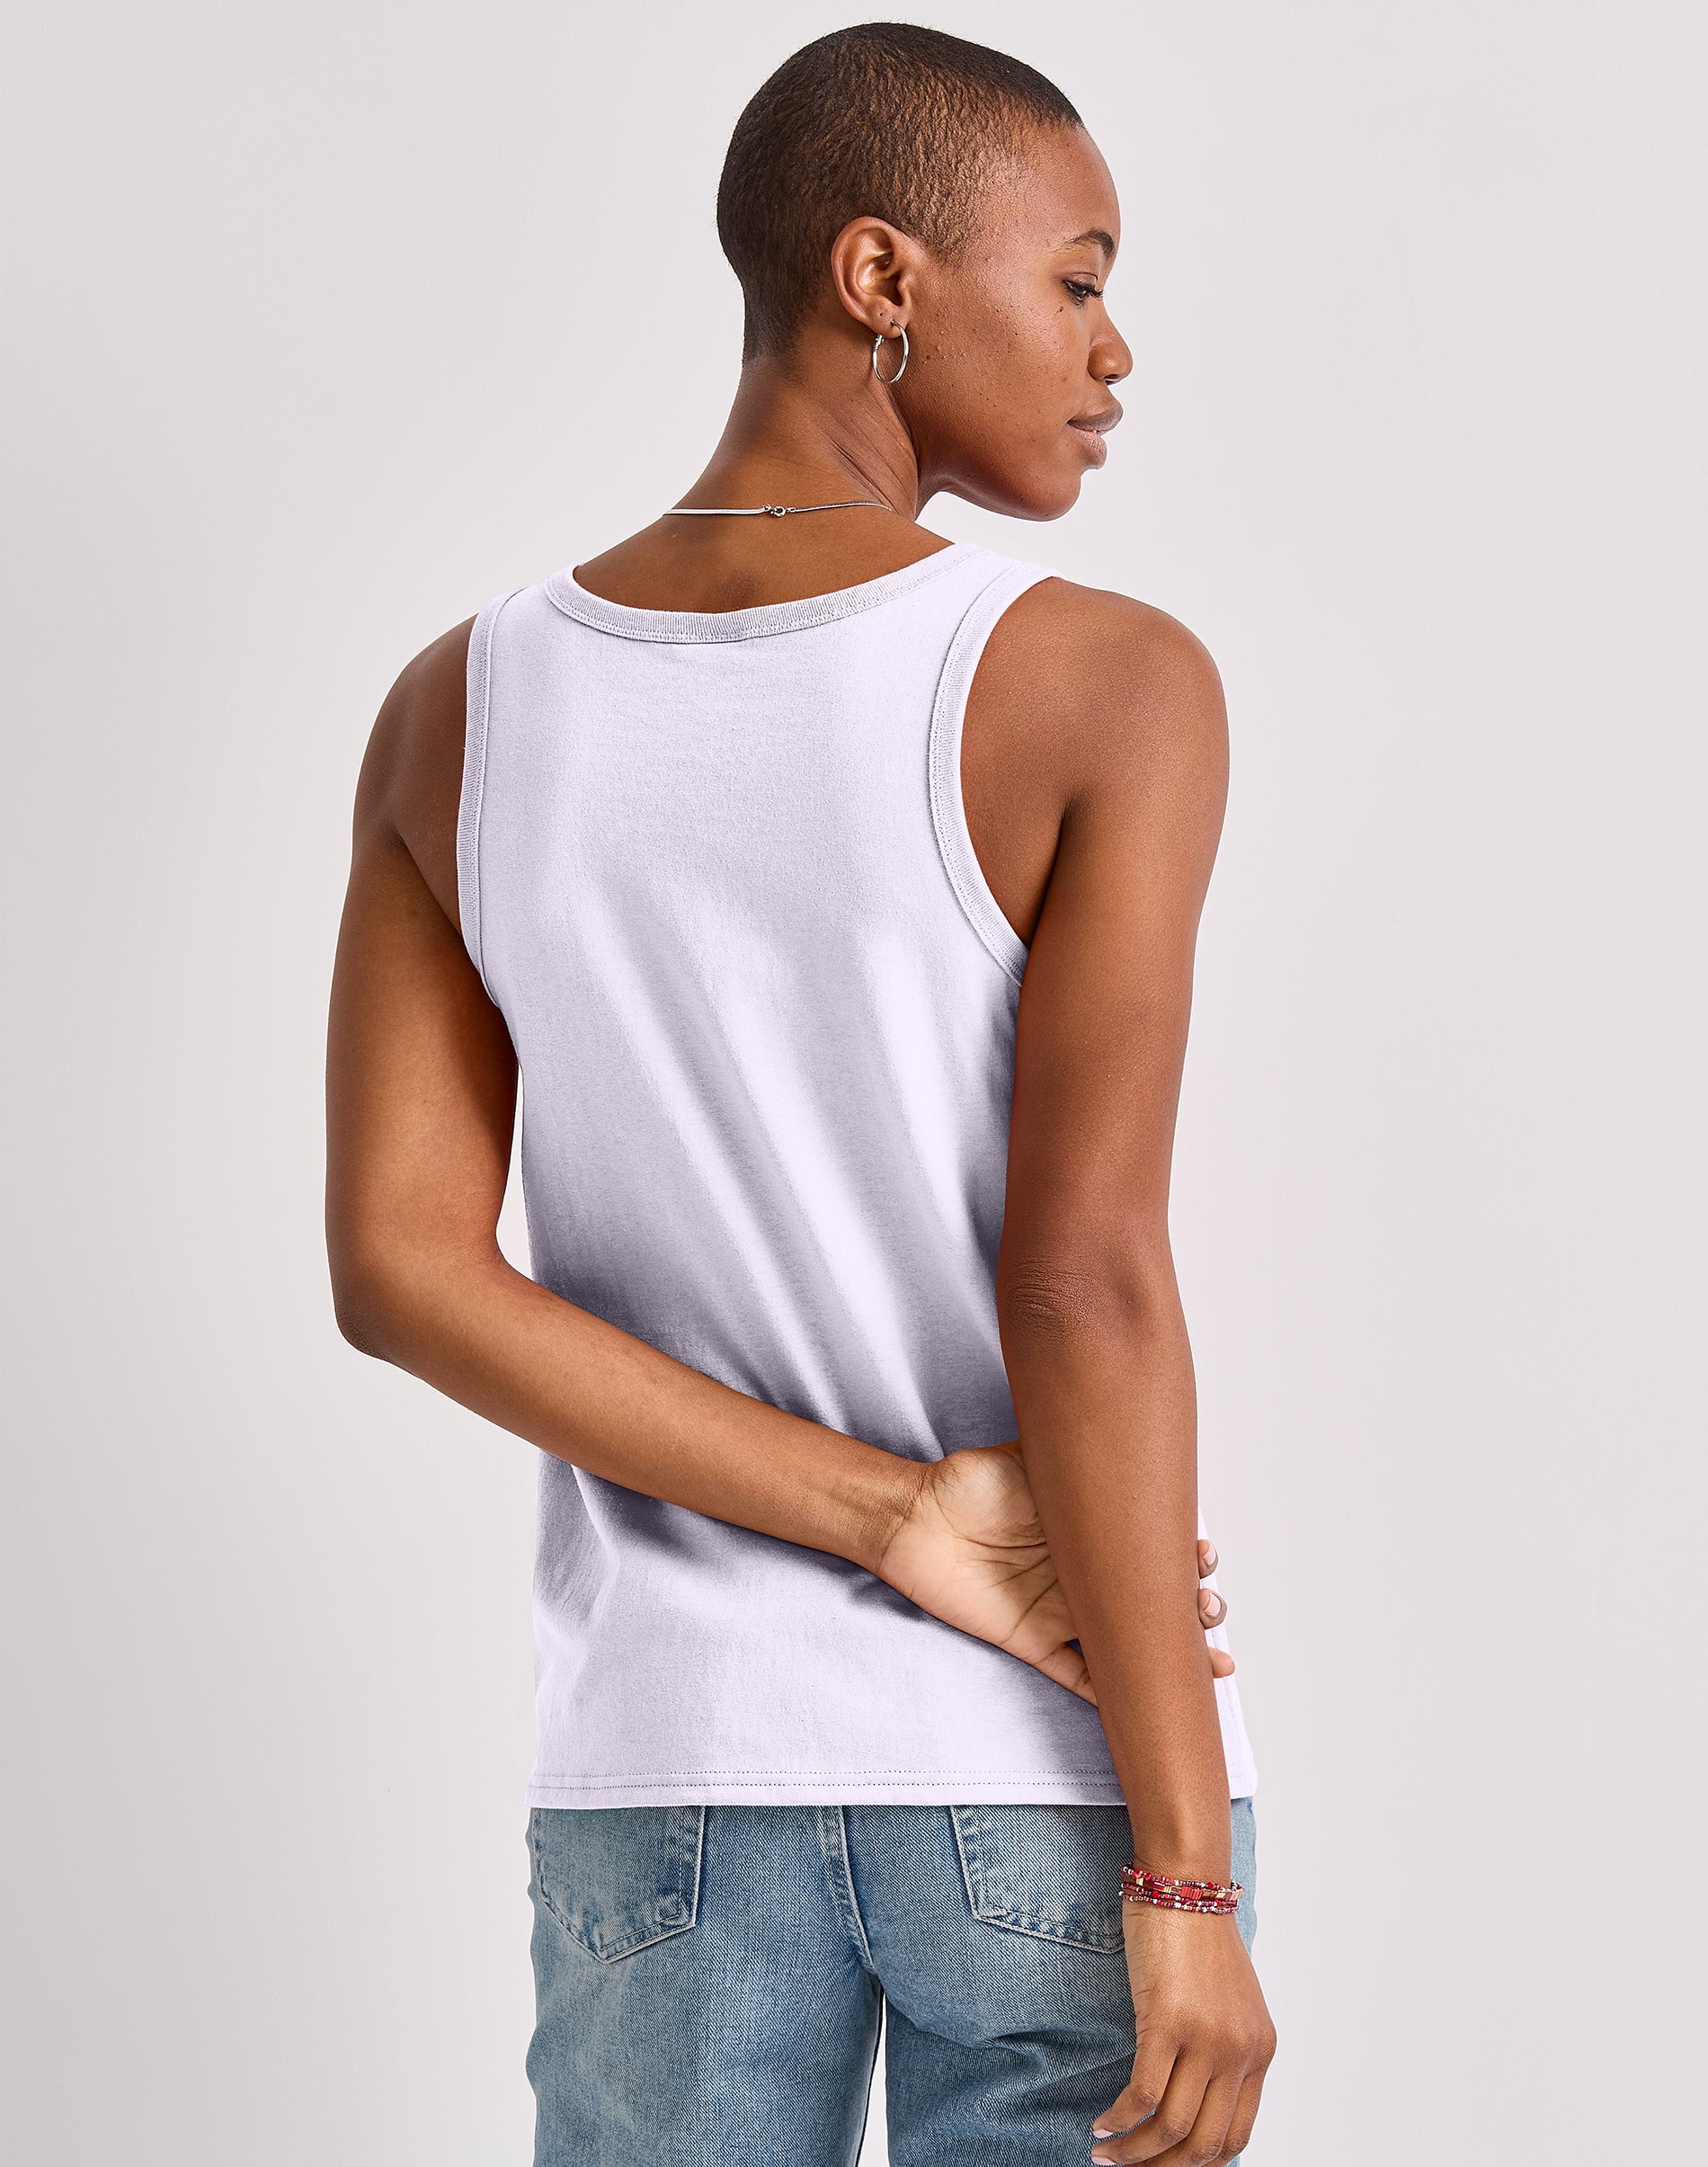 Hanes Wide Strap Tank Top Combed Cotton Jersey, $5, Sierra Trading Post